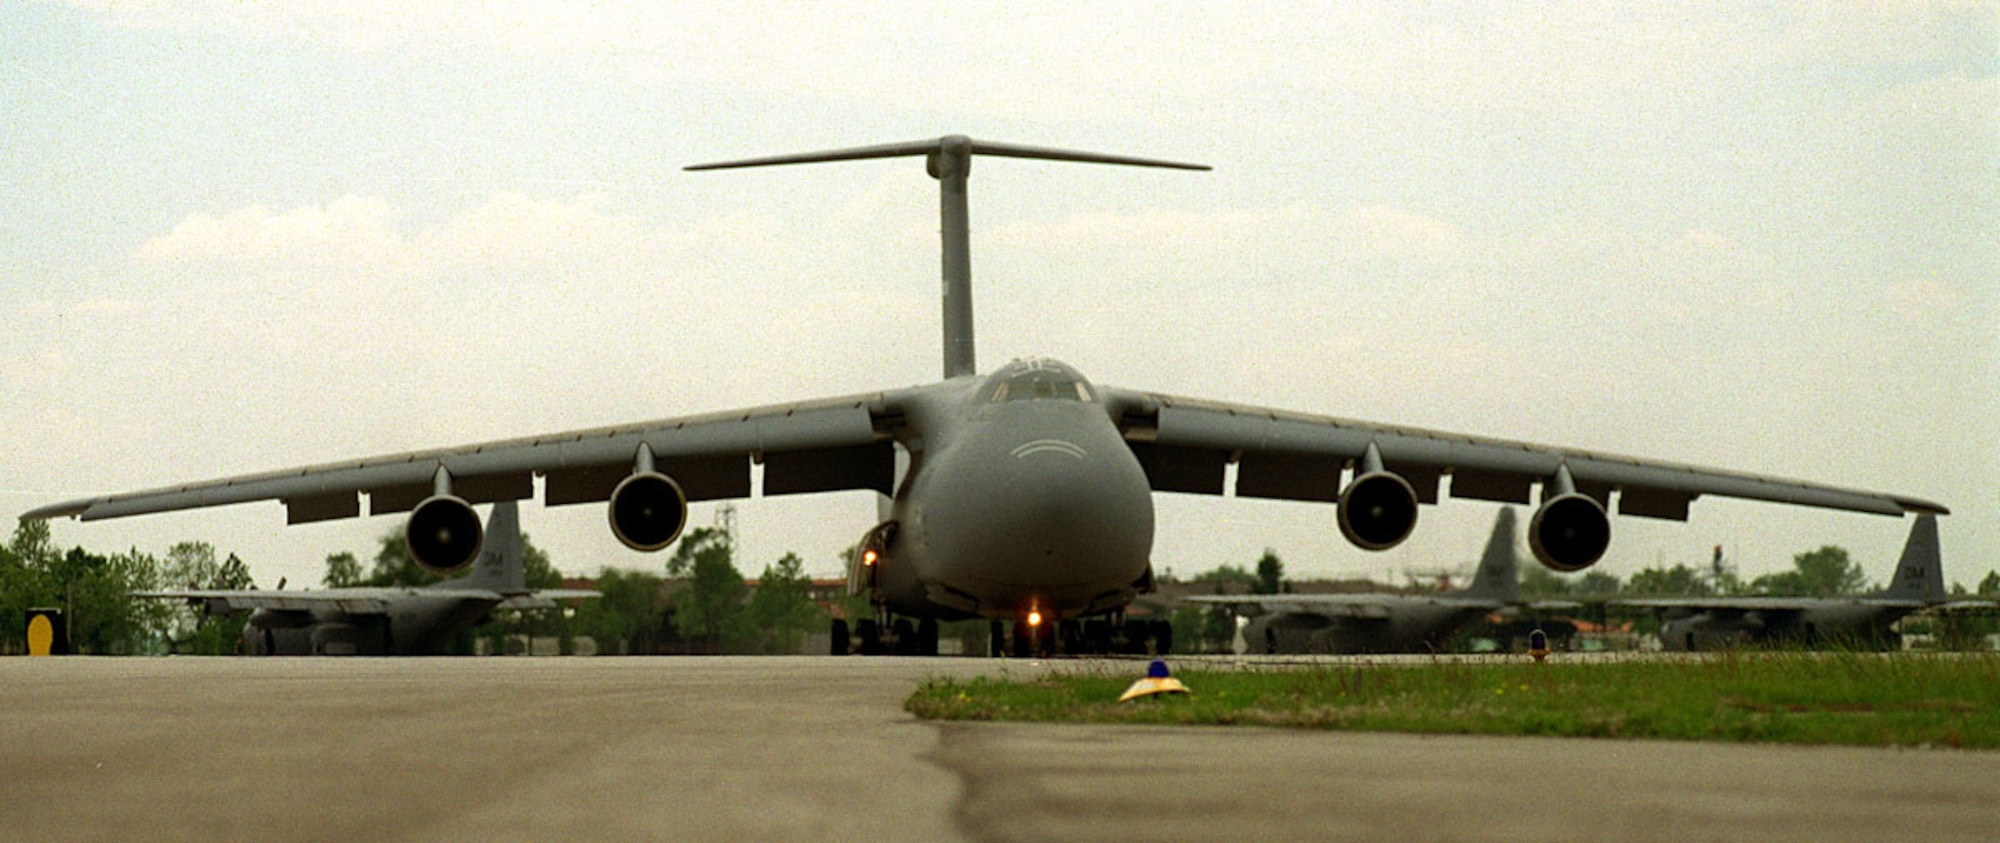 FILE PHOTO -- A C-5 Galaxy transport prepares to launch from Aviano Air Base, Italy.  The C-5 is one of the many aircraft at Aviano supporting NATO's Operation Allied Force.  (U.S. Air Force photo by Senior Airman Delia A. Castillo)